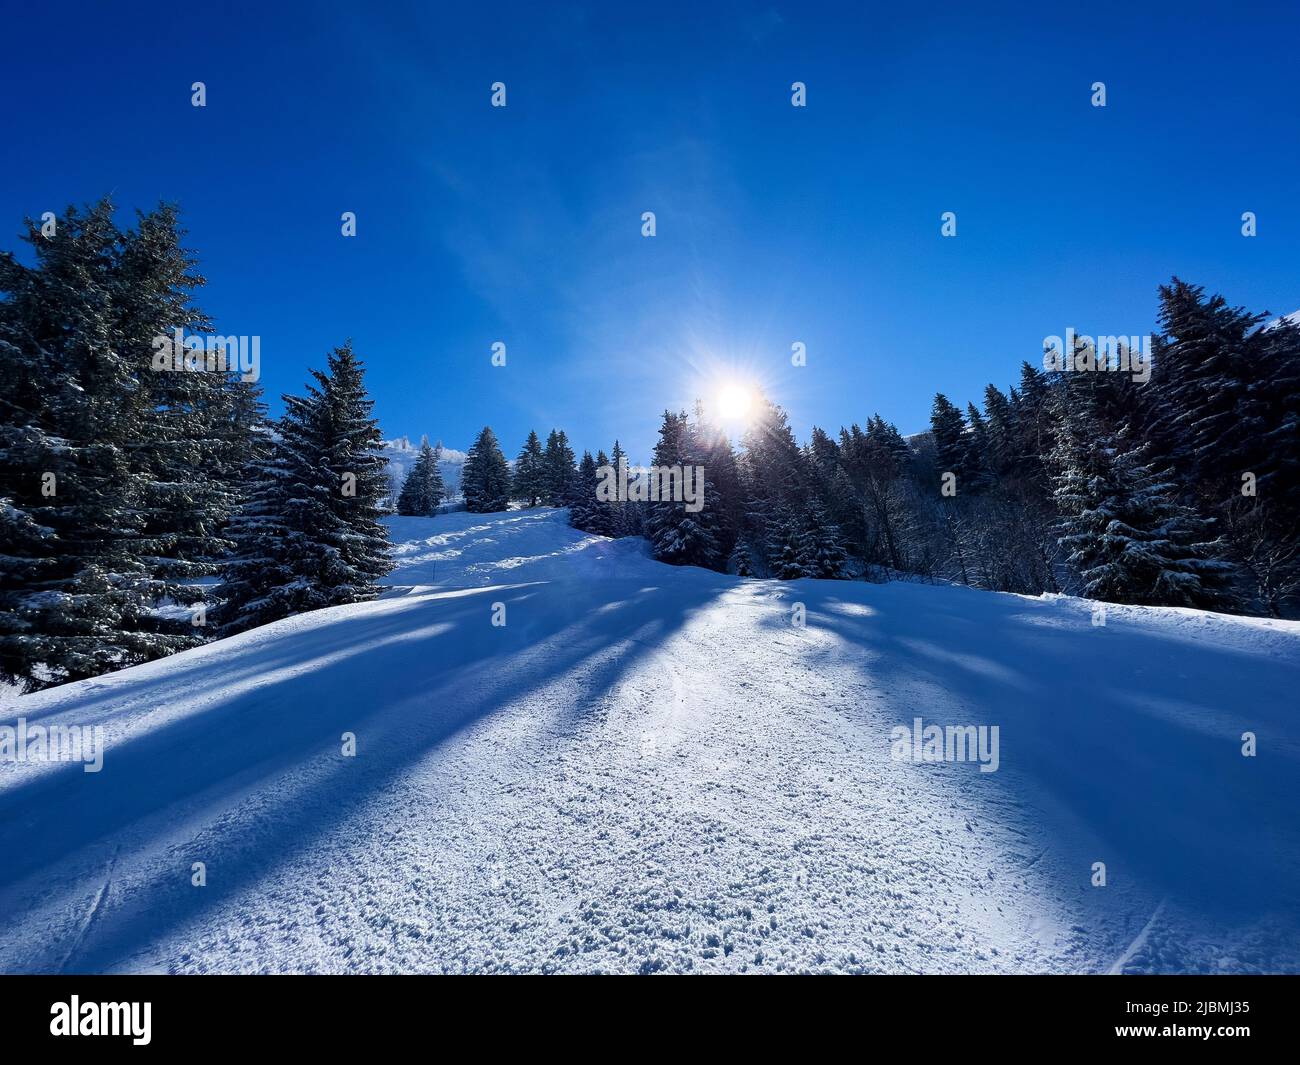 Ski track in forest at alpine resort with sun shine over trees Stock Photo